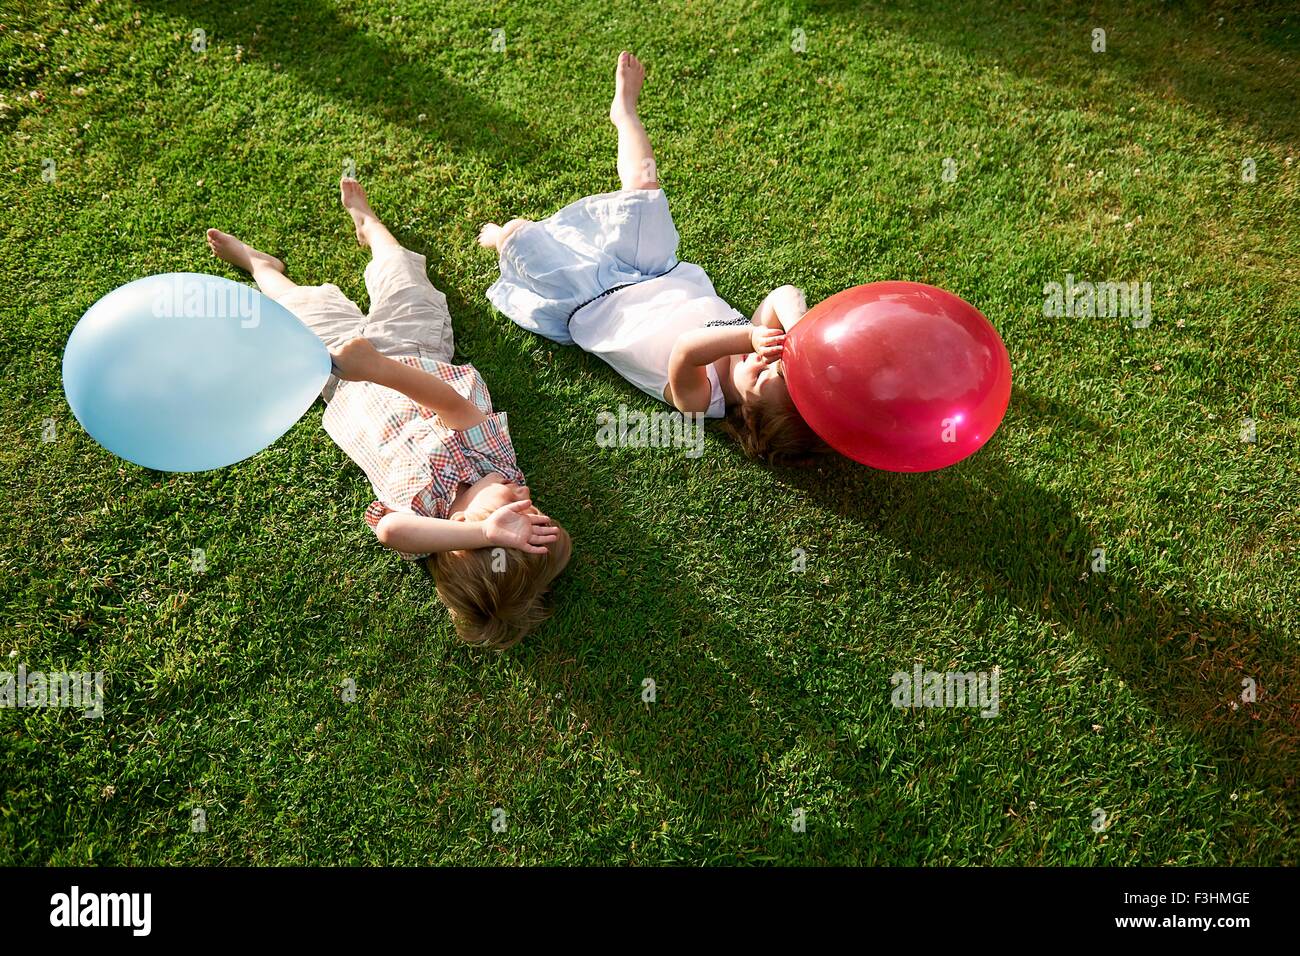 High angle view of brother and sister lying on grass holding balloon Stock Photo